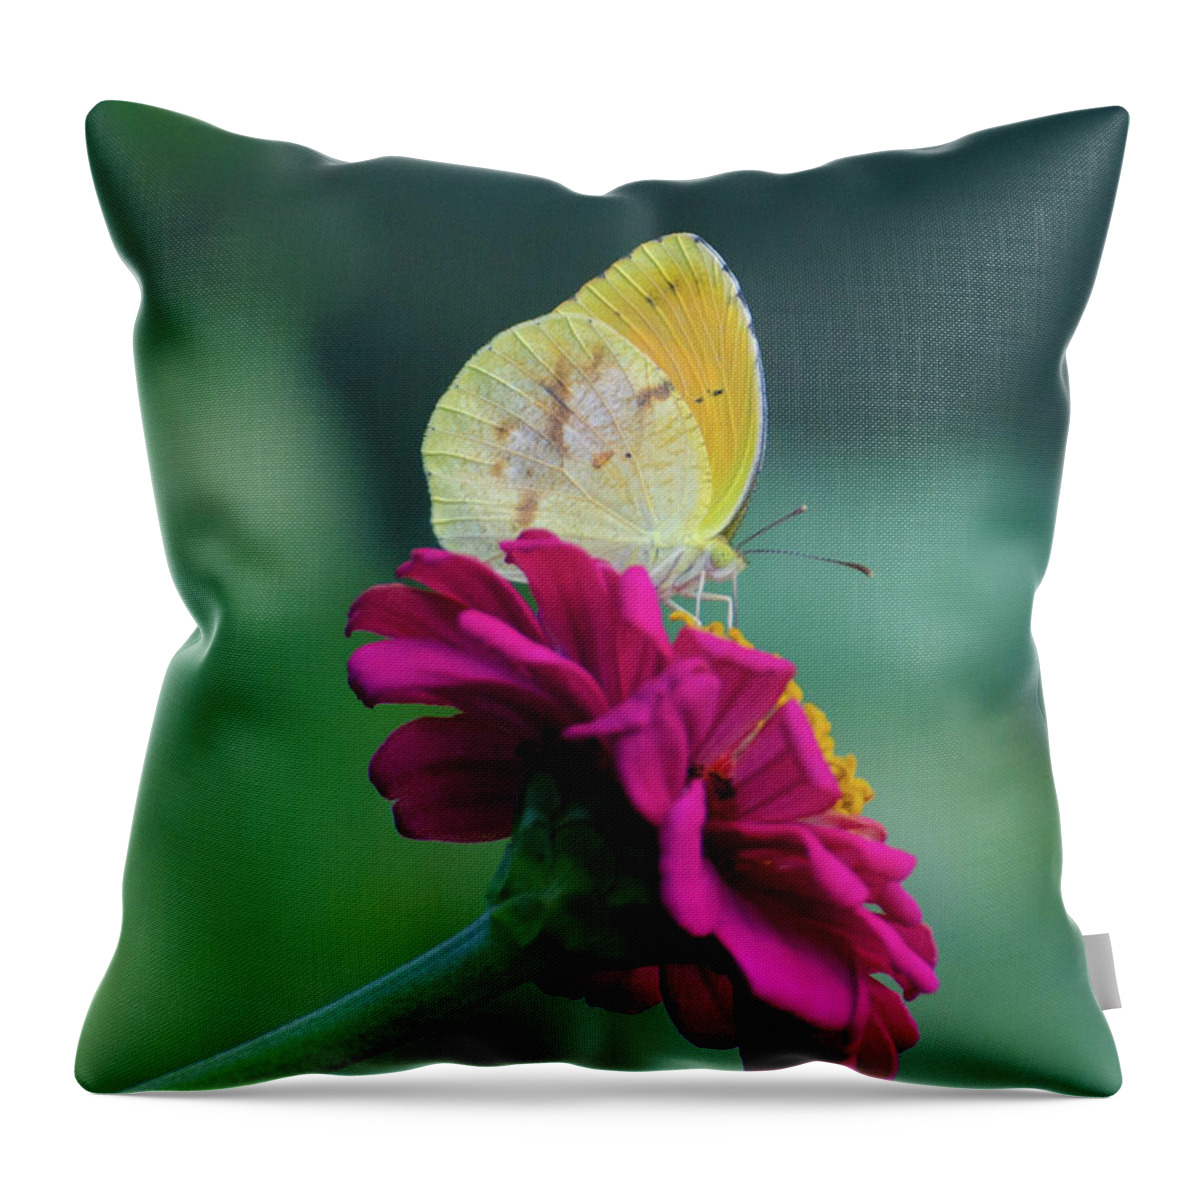 Insect Throw Pillow featuring the photograph The Sweet Spot by Donna Brown